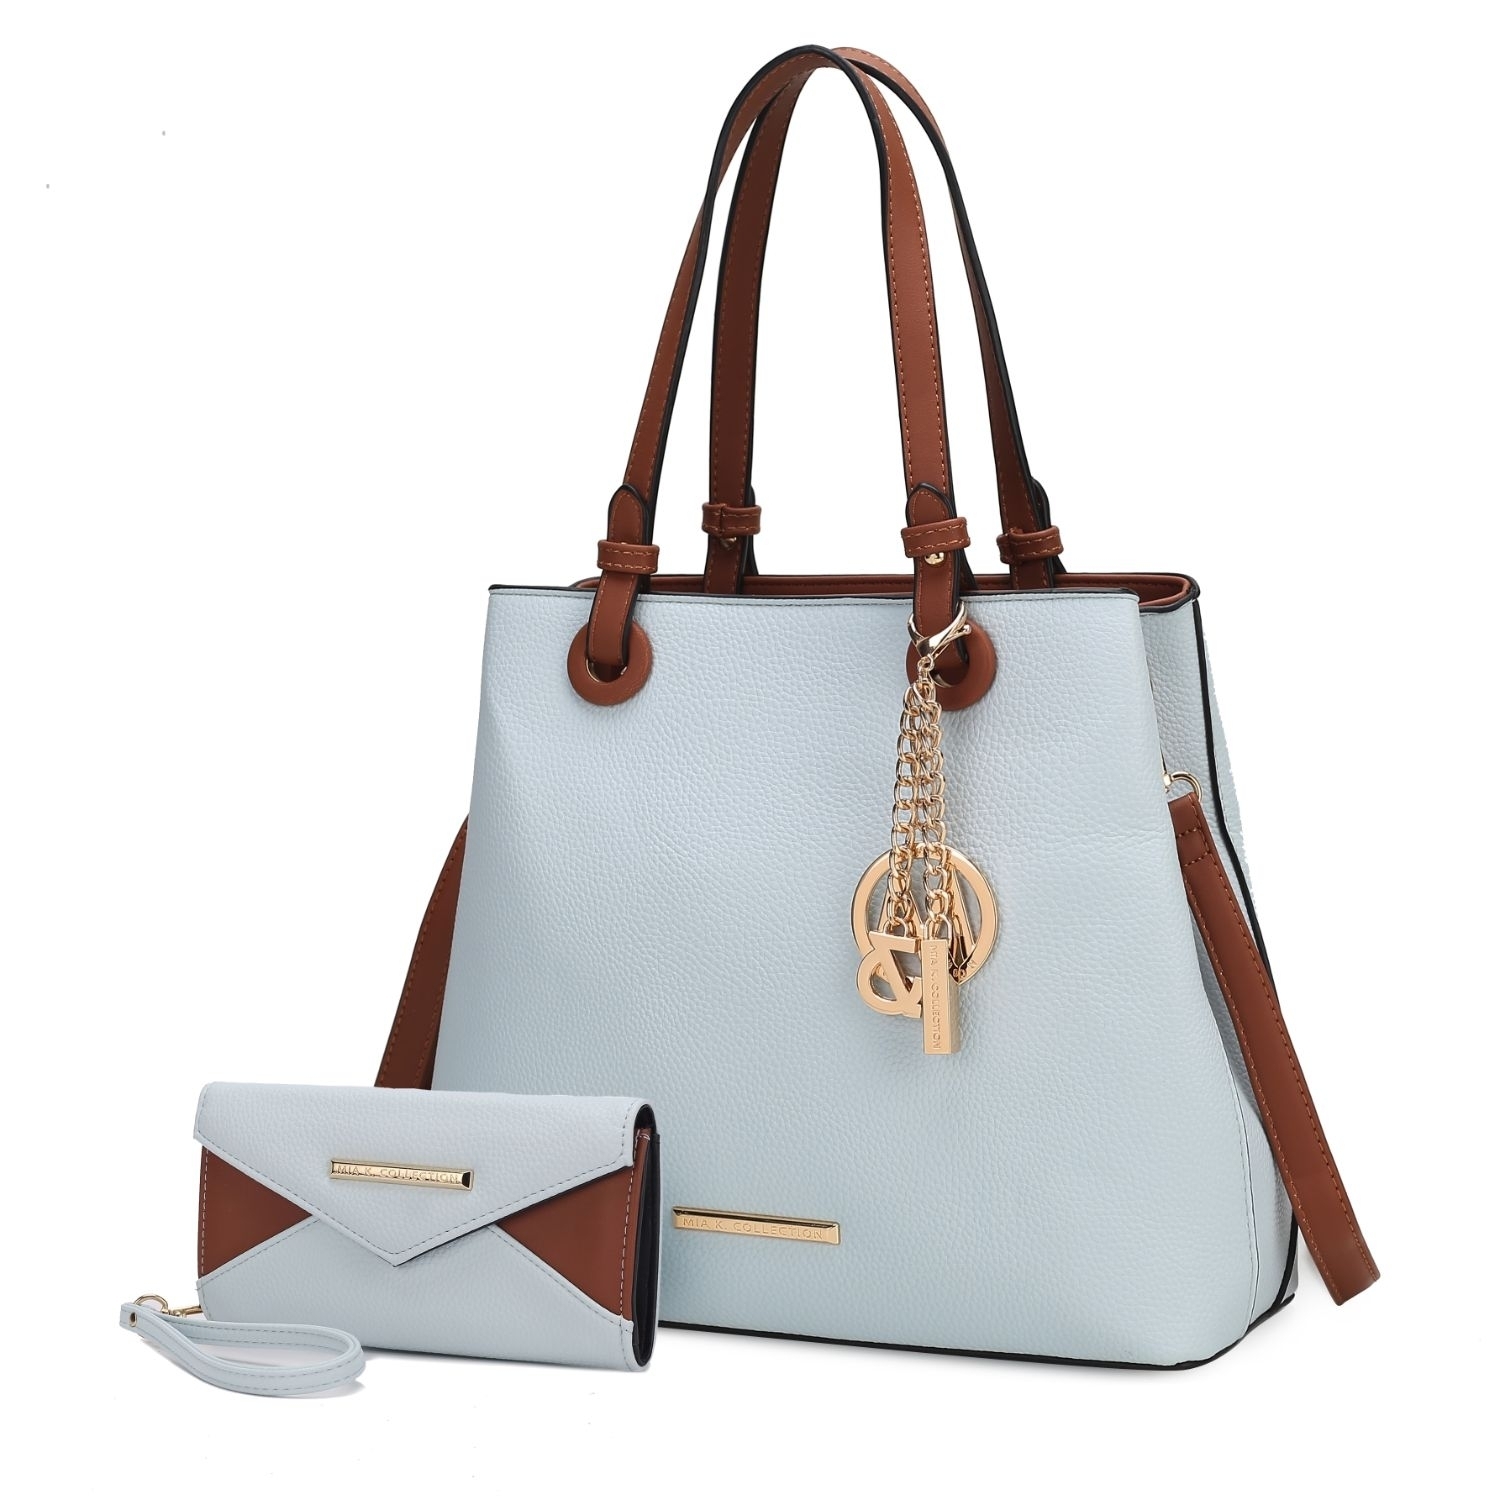 MKF Collection Kearny Vegan Leather Women's Tote Bag With Wallet By Mia K- 2 Pieces - Light Blue